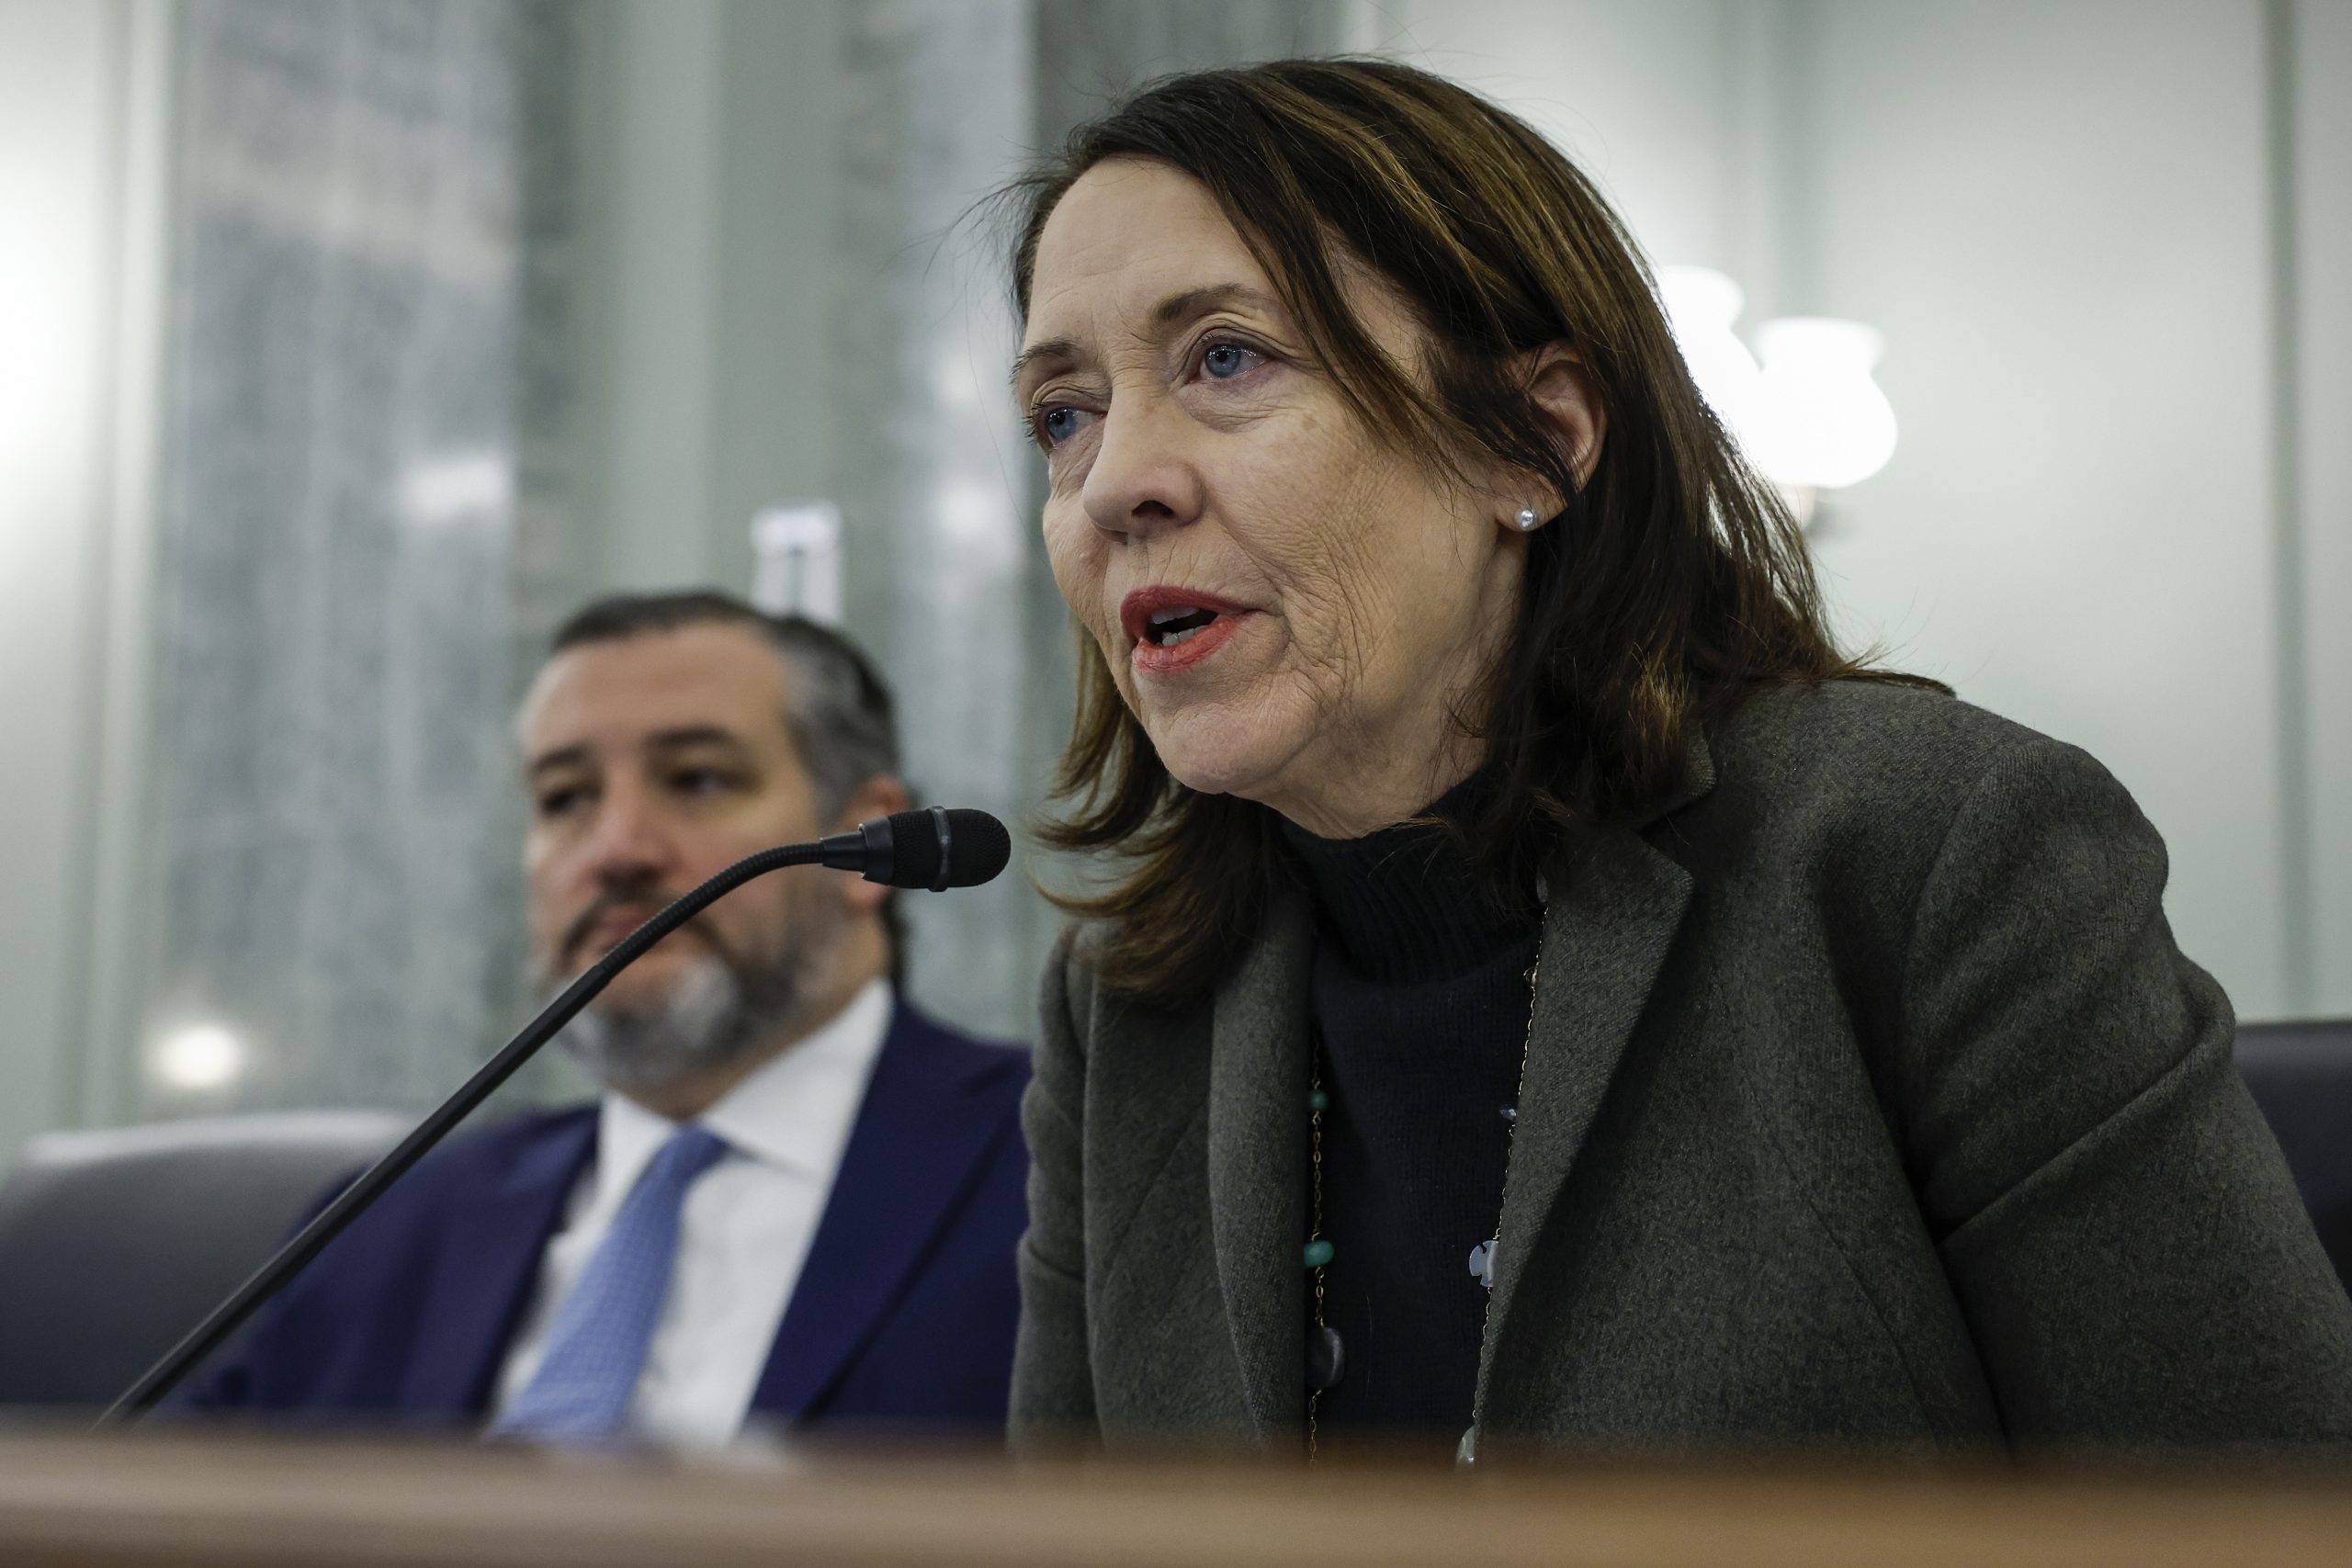 Maria Cantwell received substantial donations from a TikTok lobbyist shortly after the House approved a bill aimed at Chinese-owned apps